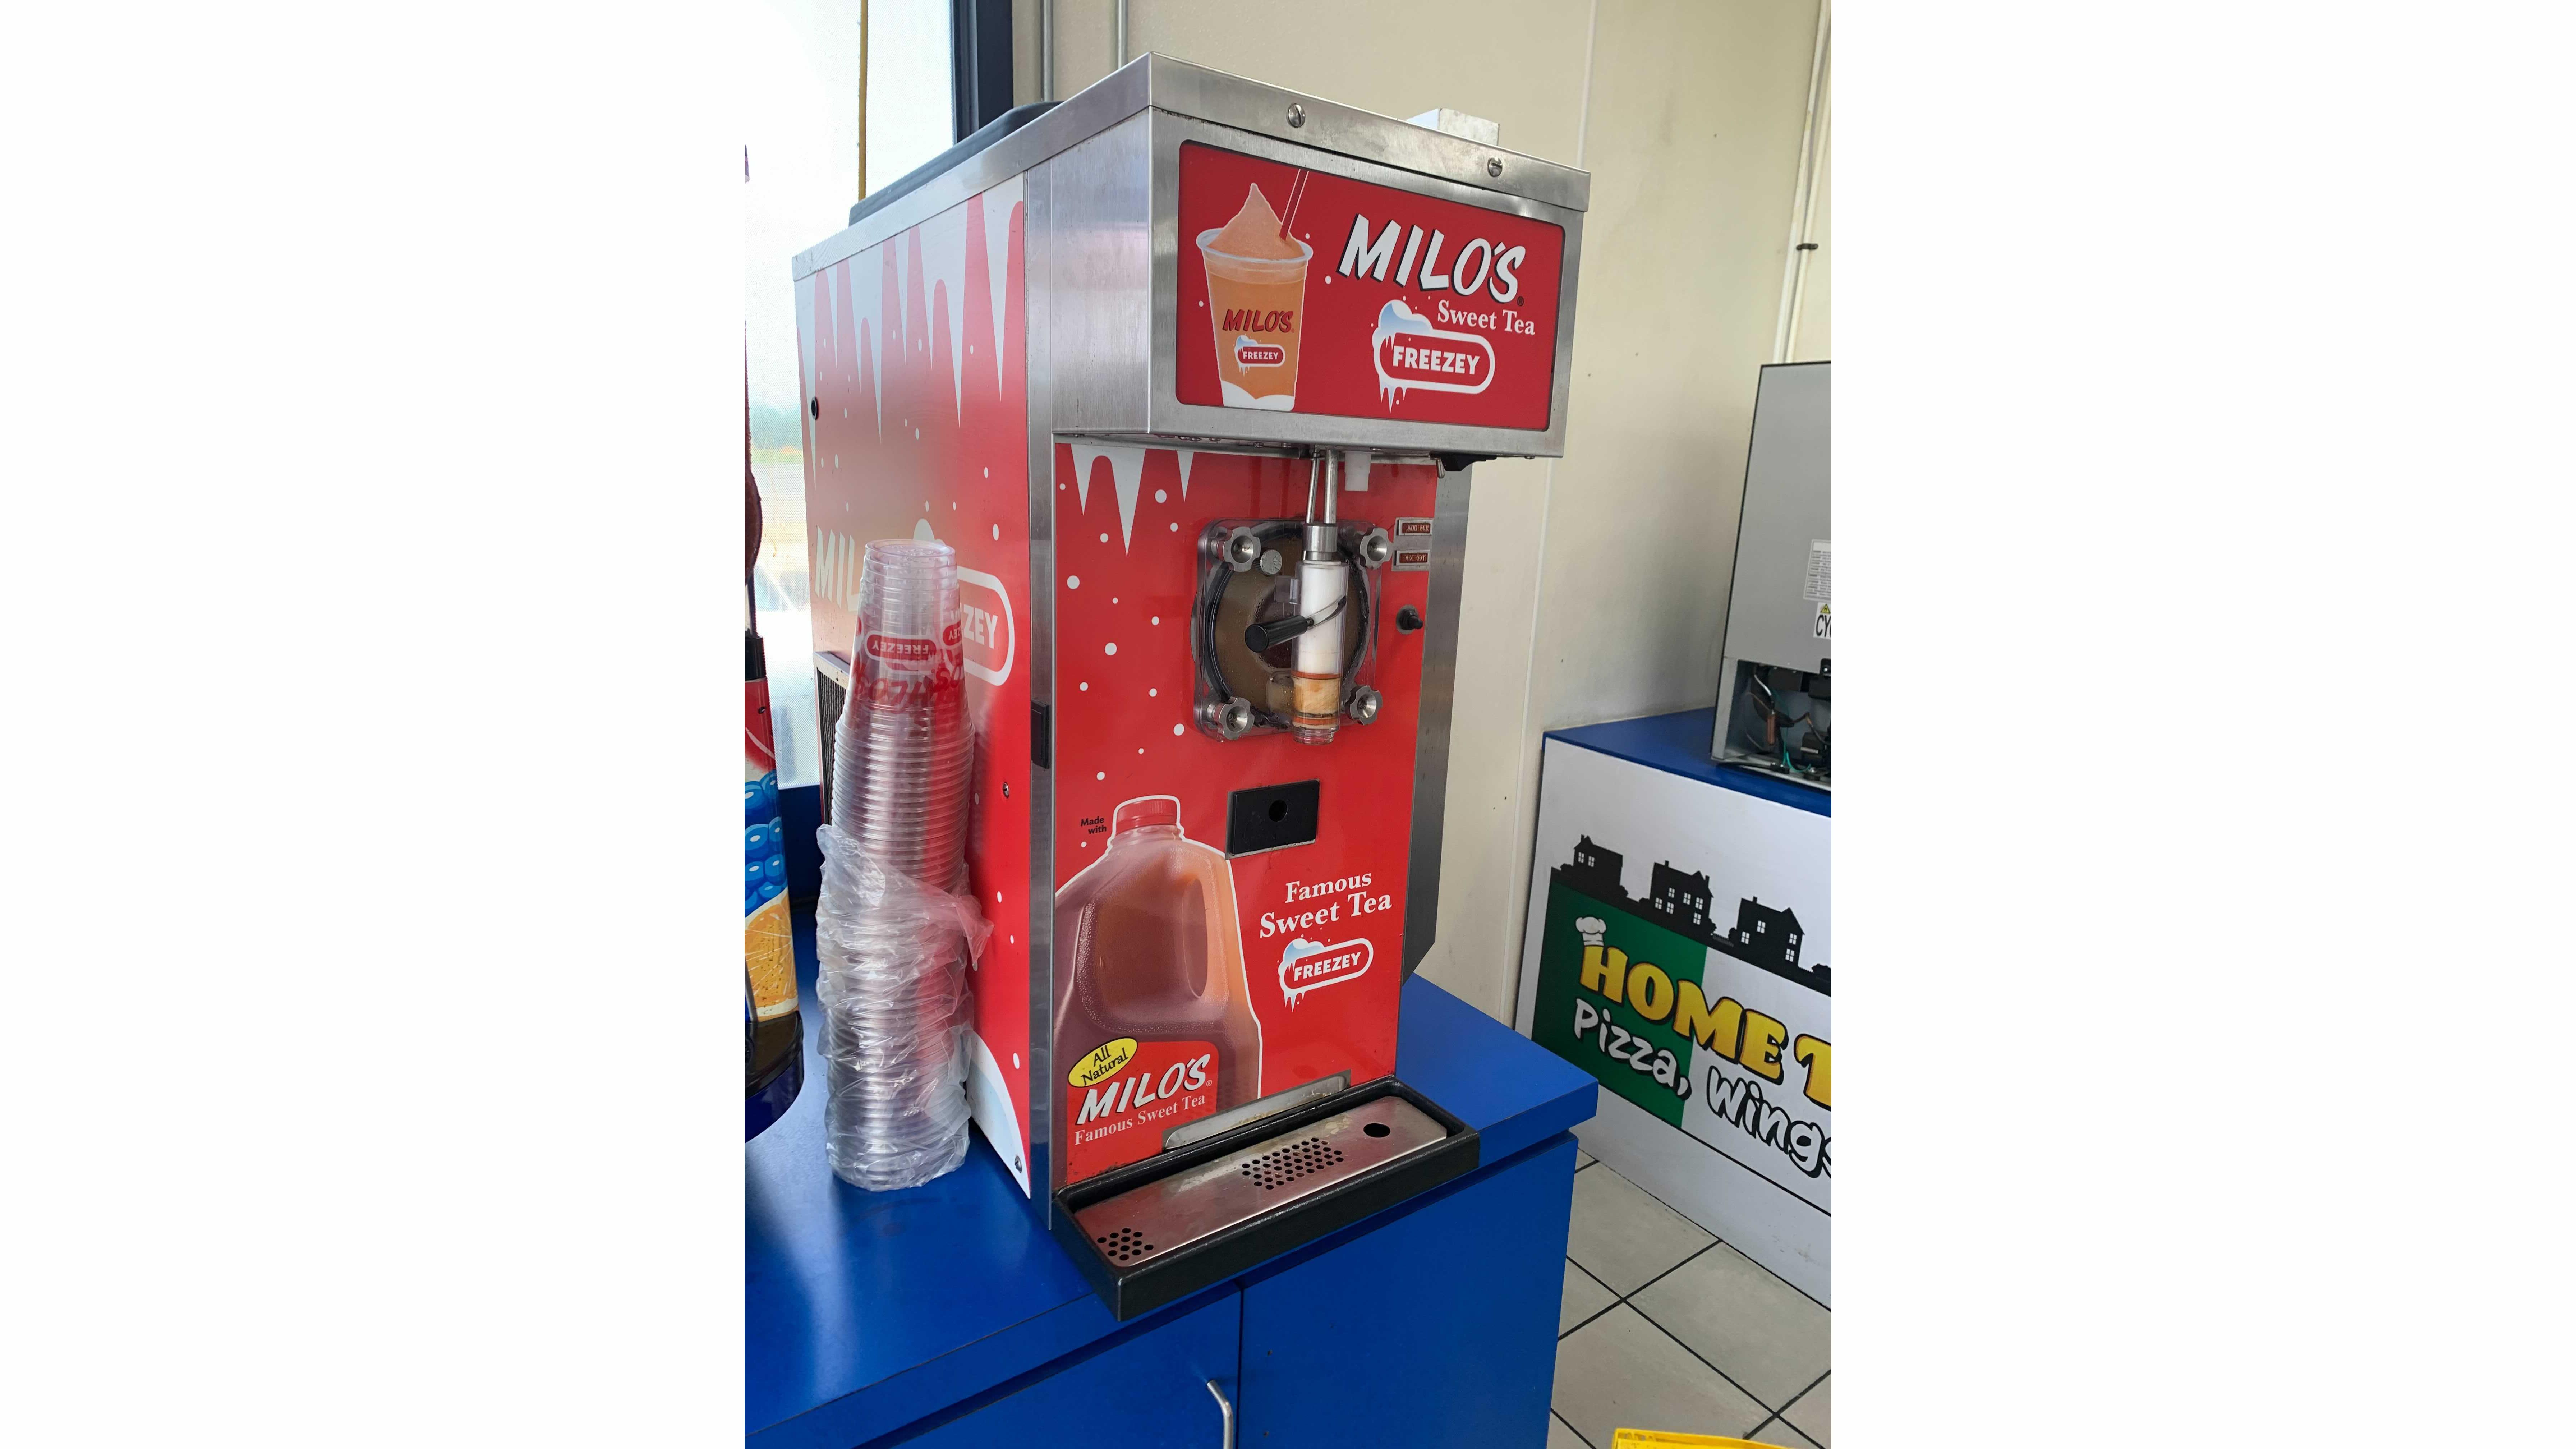 The Milo's Sweet Tea Freezey is glorious: Here's where you can get one 